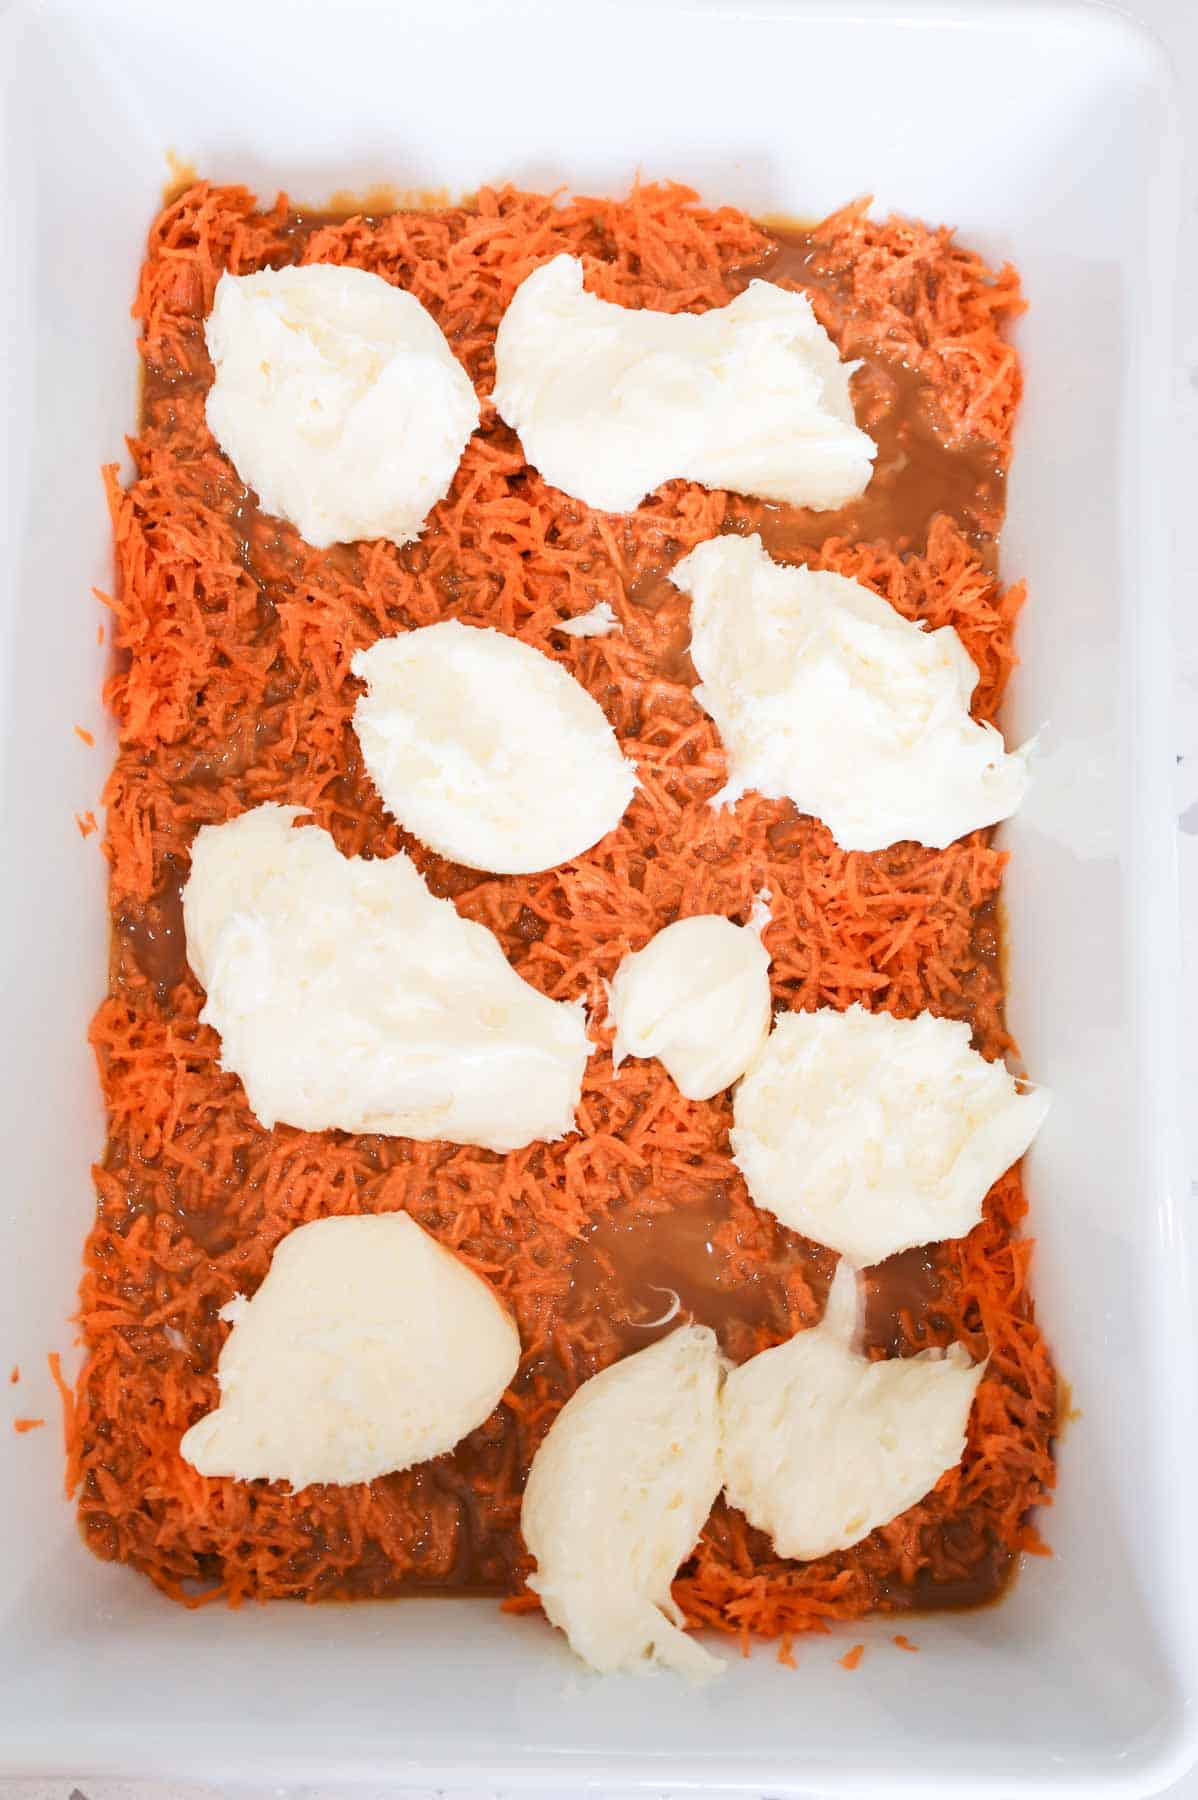 blobs of cream cheese frosting on top of dulce de leche and grated carrot in a baking dish